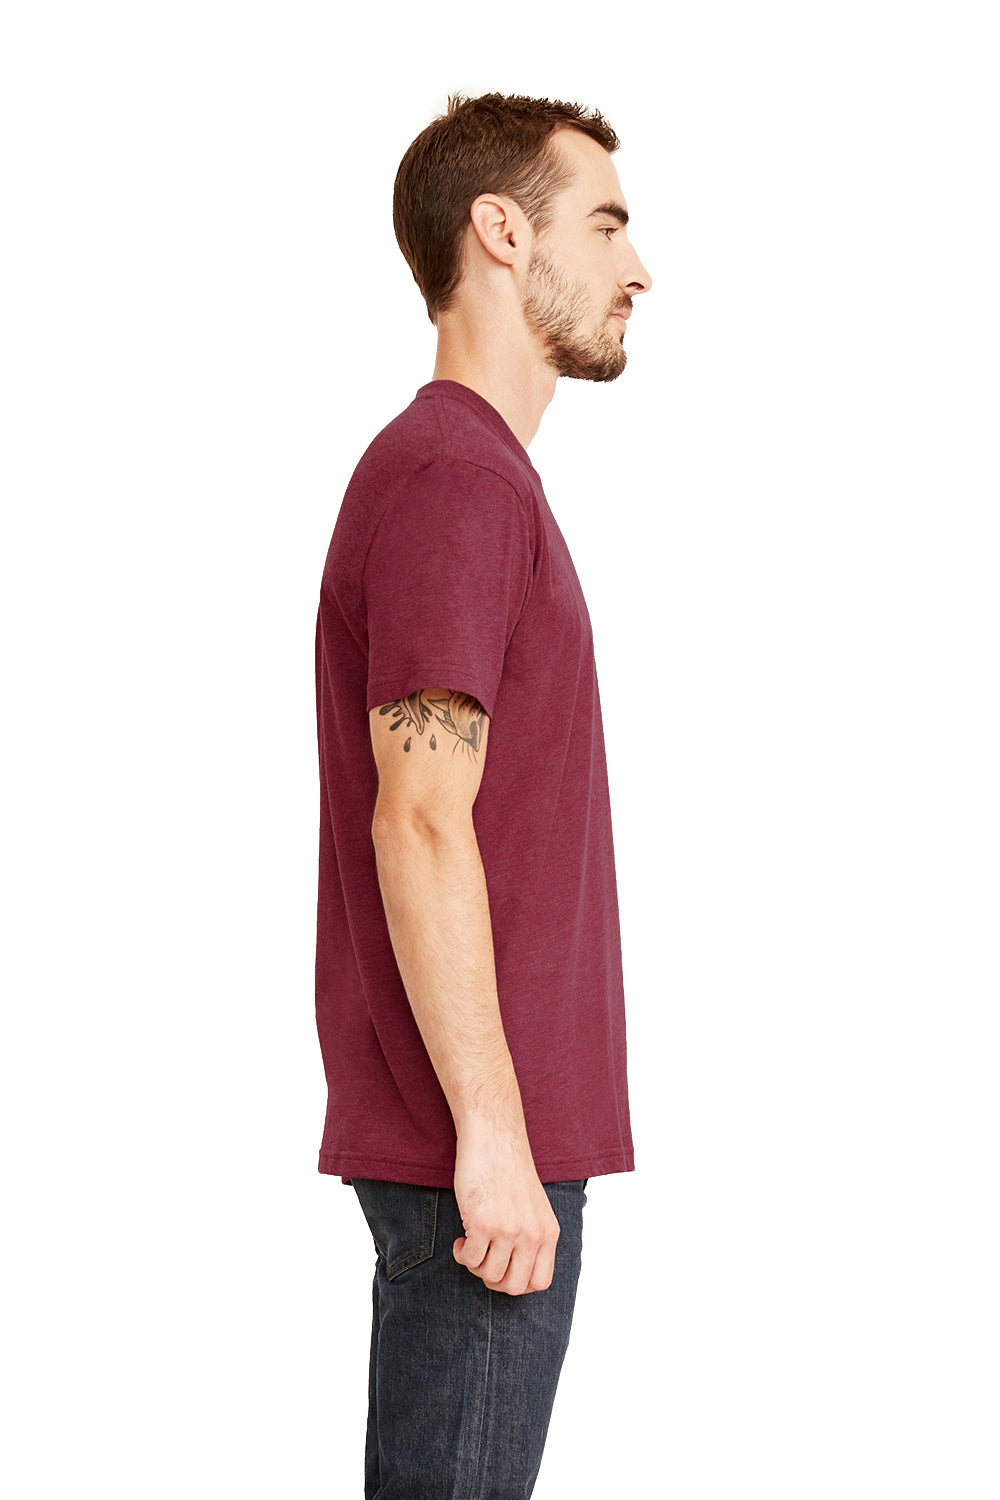 Next Level 6410 Mens Sueded Jersey Short Sleeve Crewneck T-Shirt Heather Maroon Side